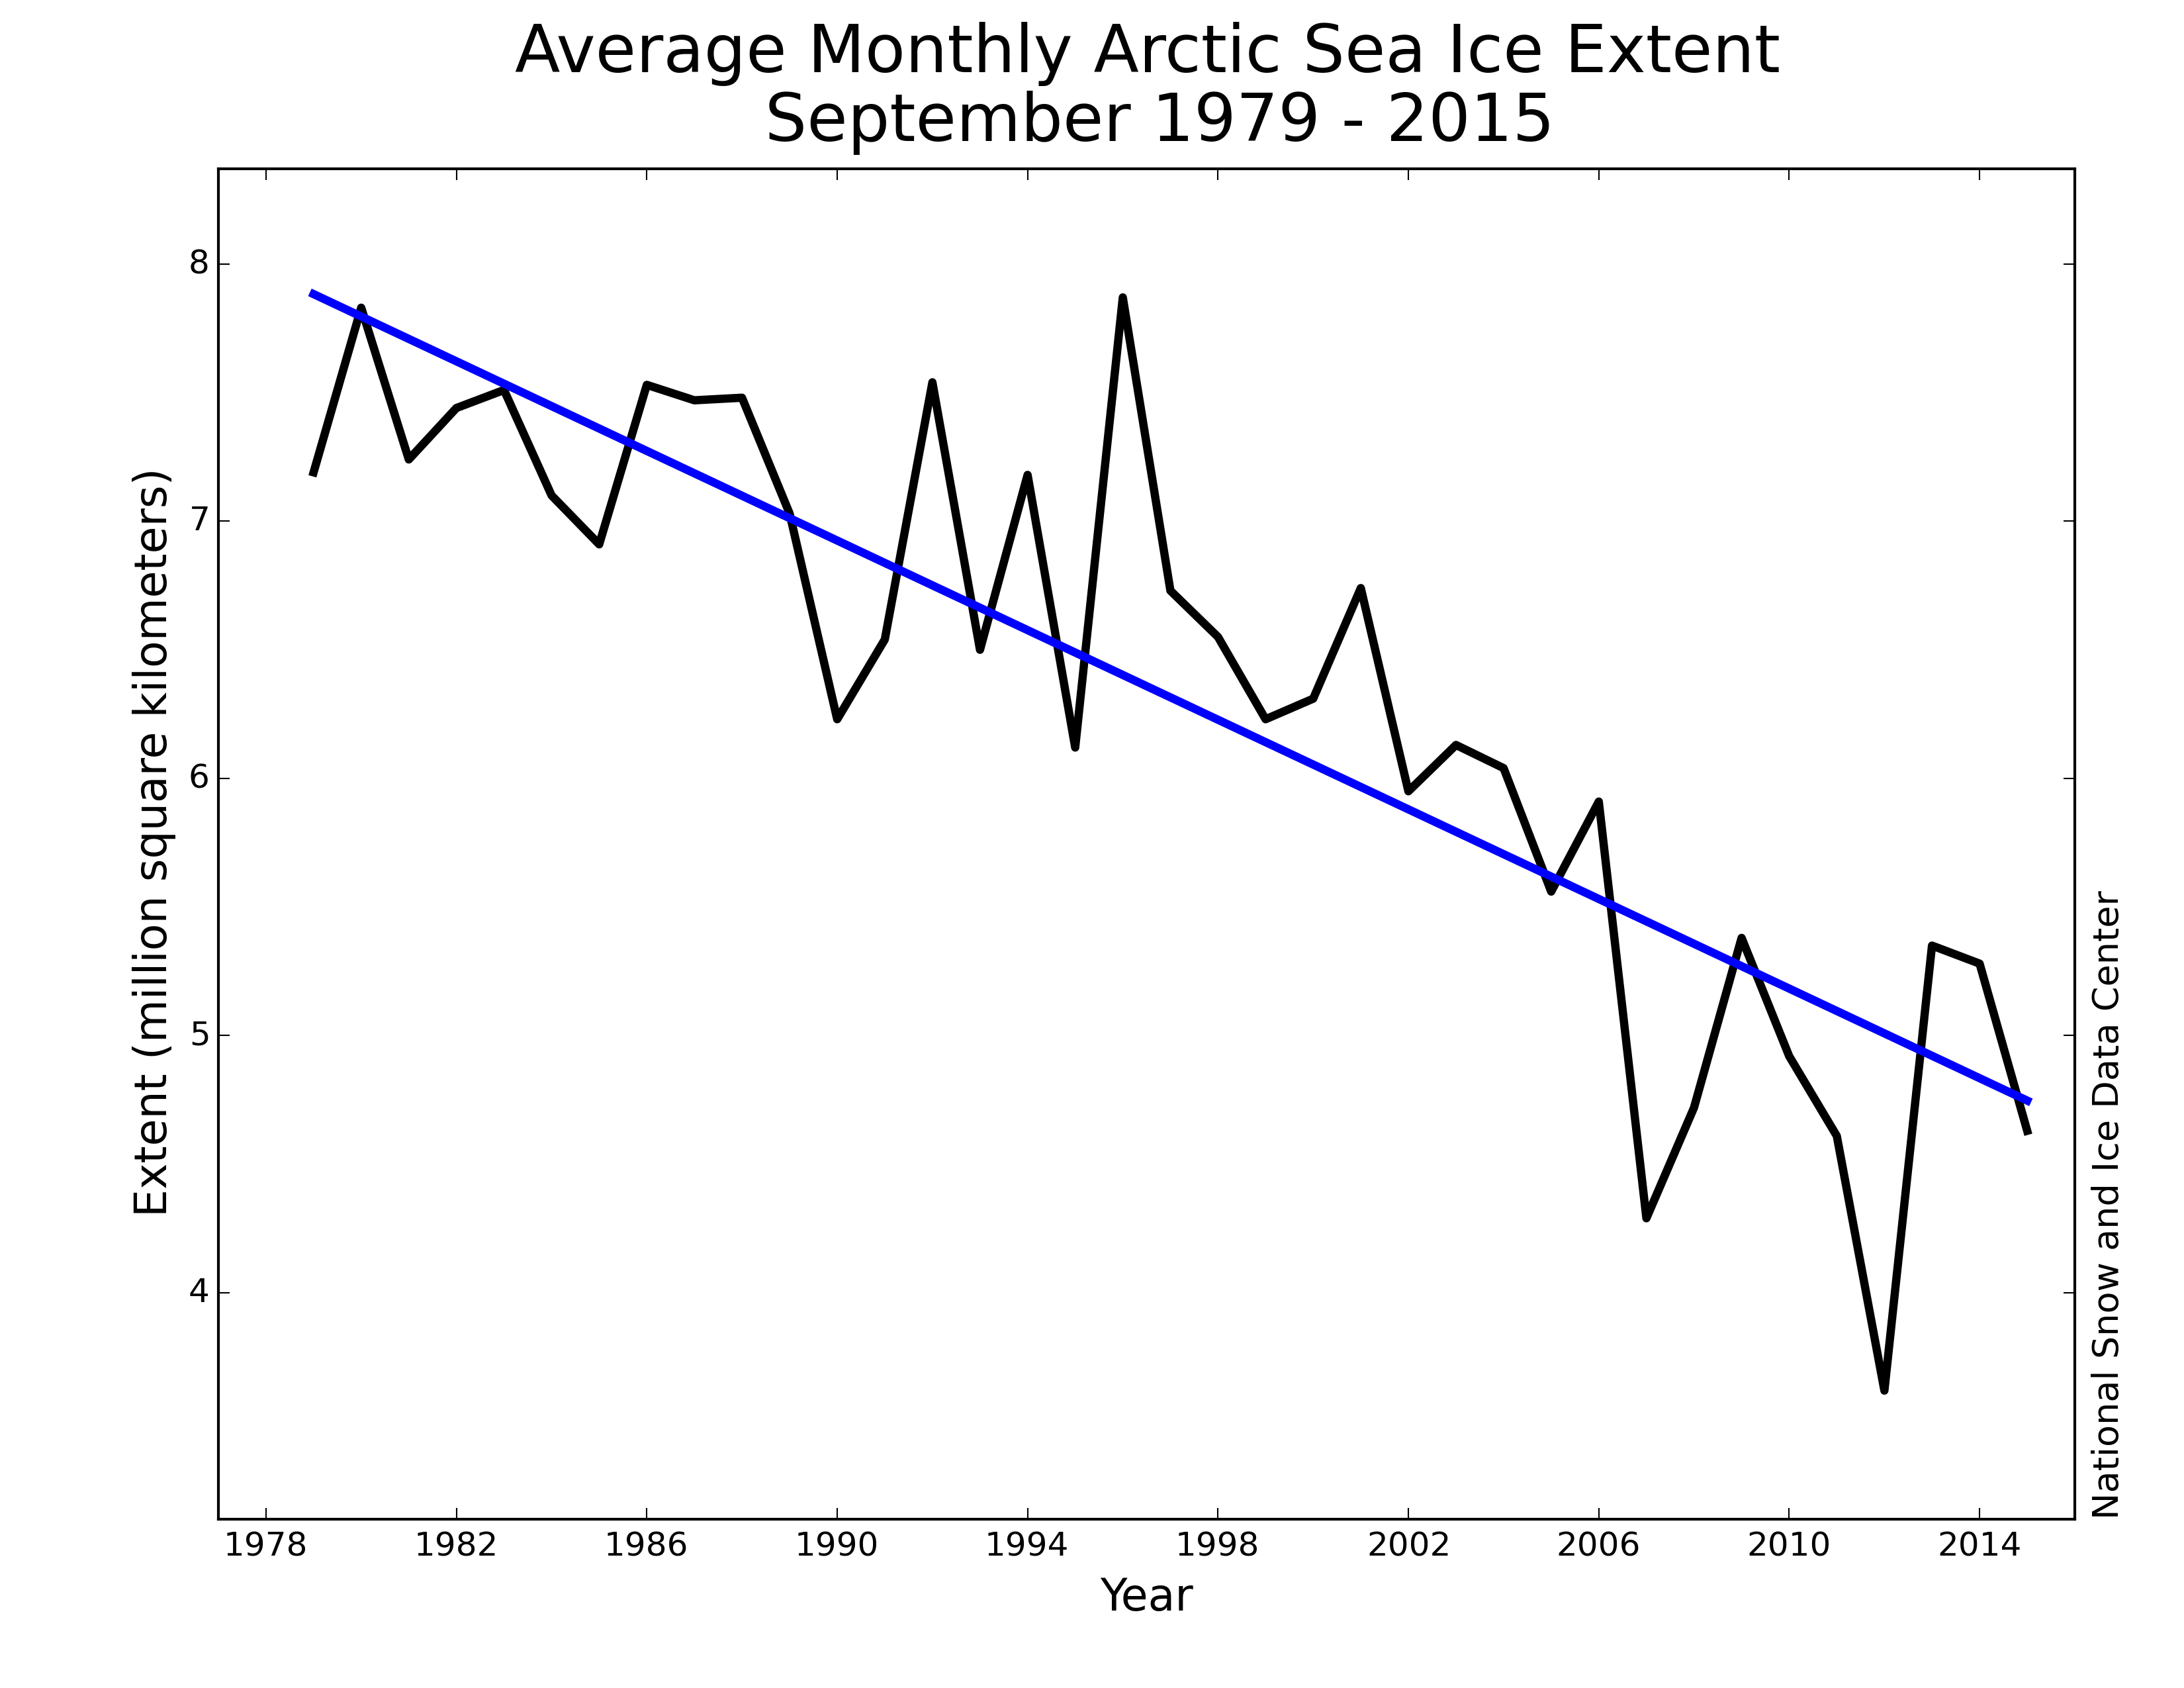 Average September Arctic sea ice extent, from 1979 to 2015. Source: NSIDC